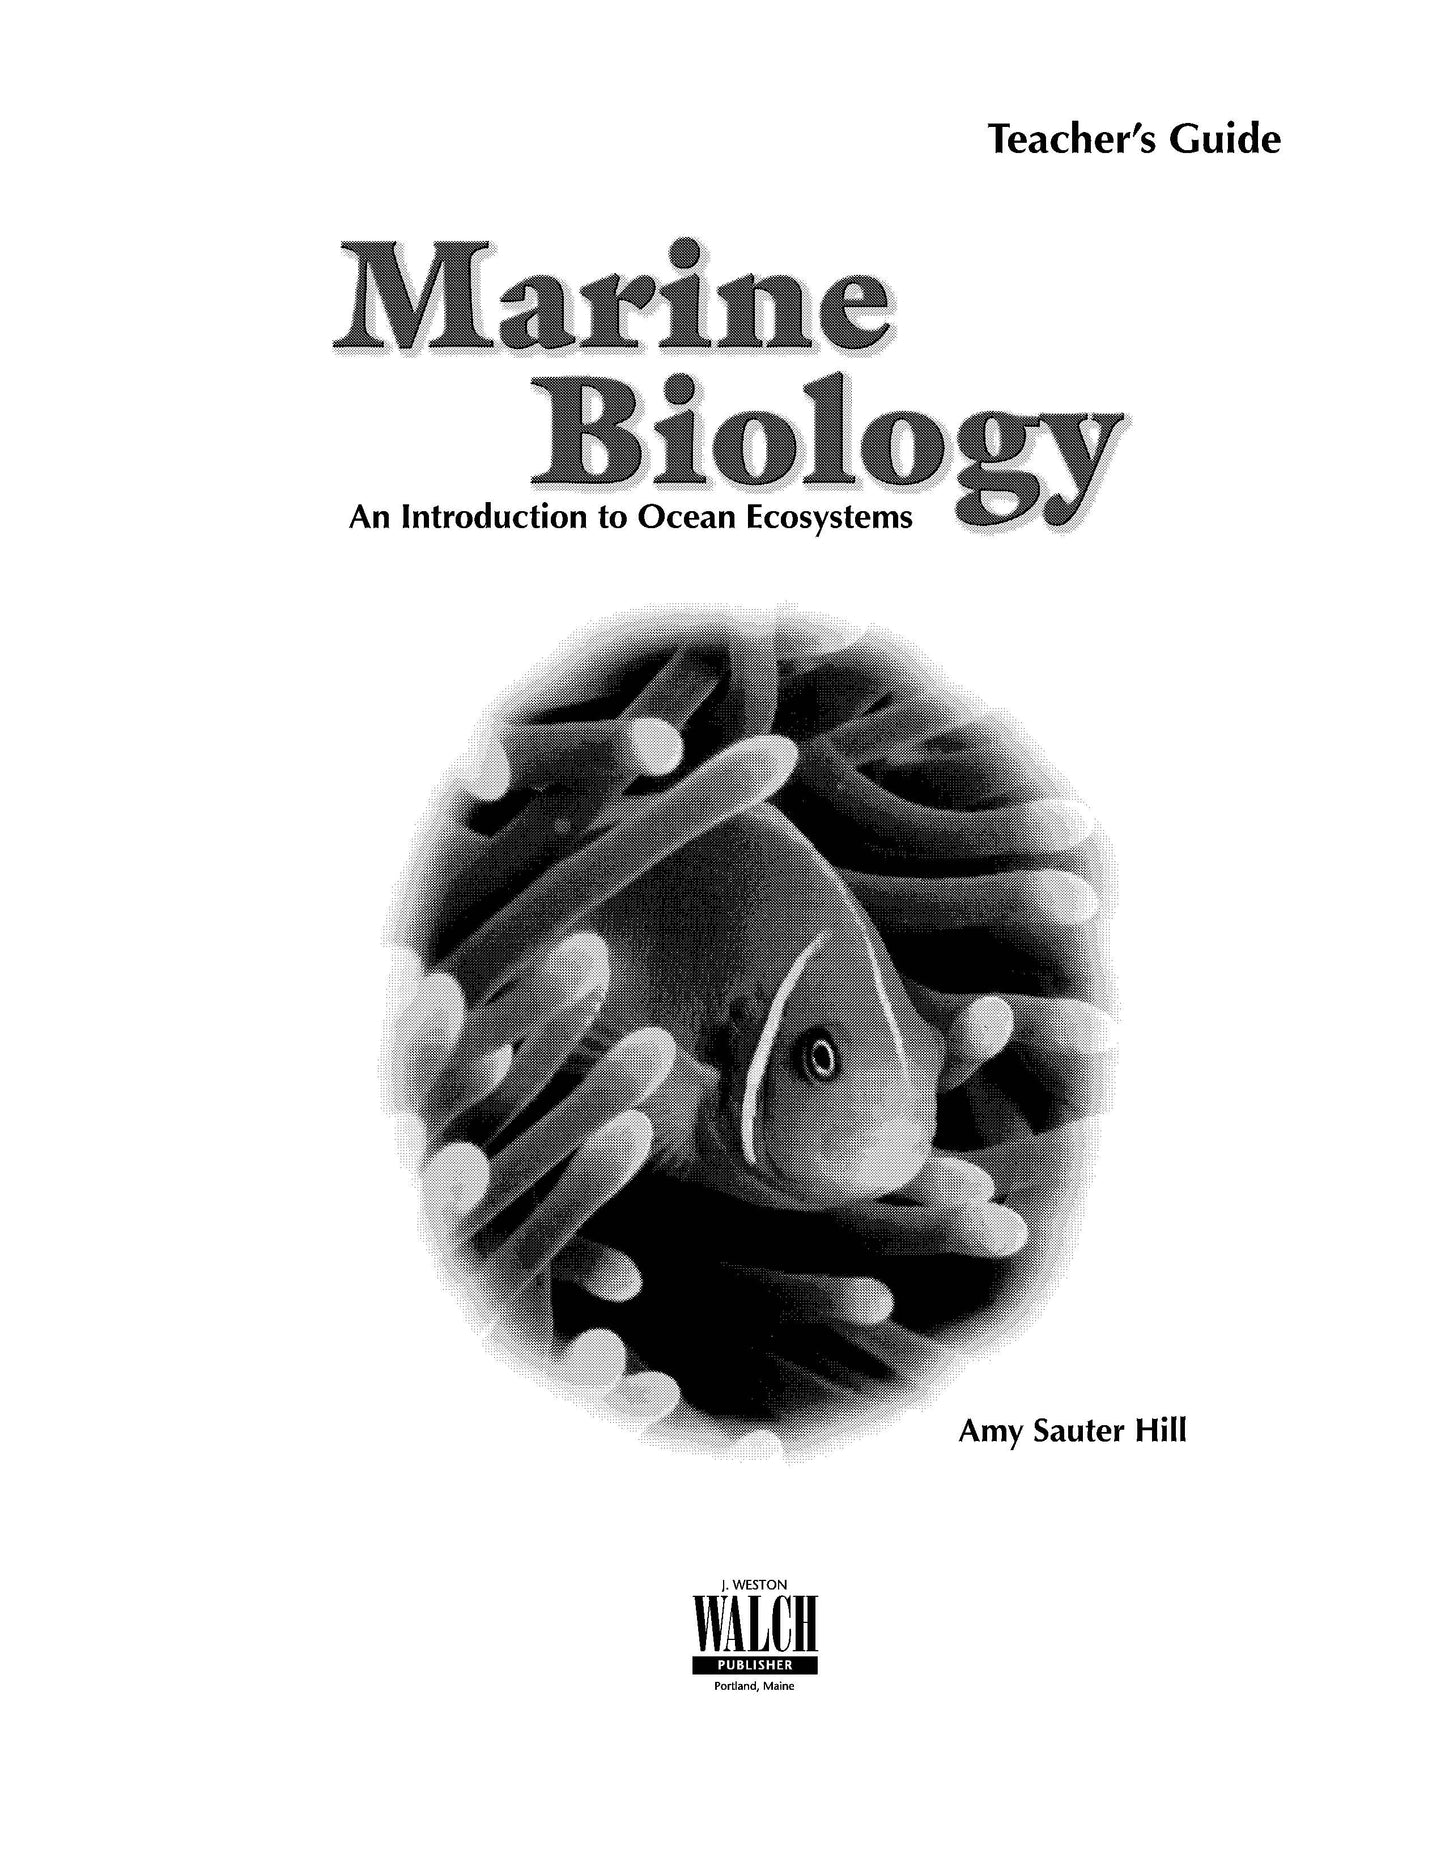 Marine Biology: An Introduction to Ocean Ecosystems Teacher's Guide, Science, Biology, Physics, Chemistry, Earth Science, Teaching Resources, Book, Bright Education Australia 